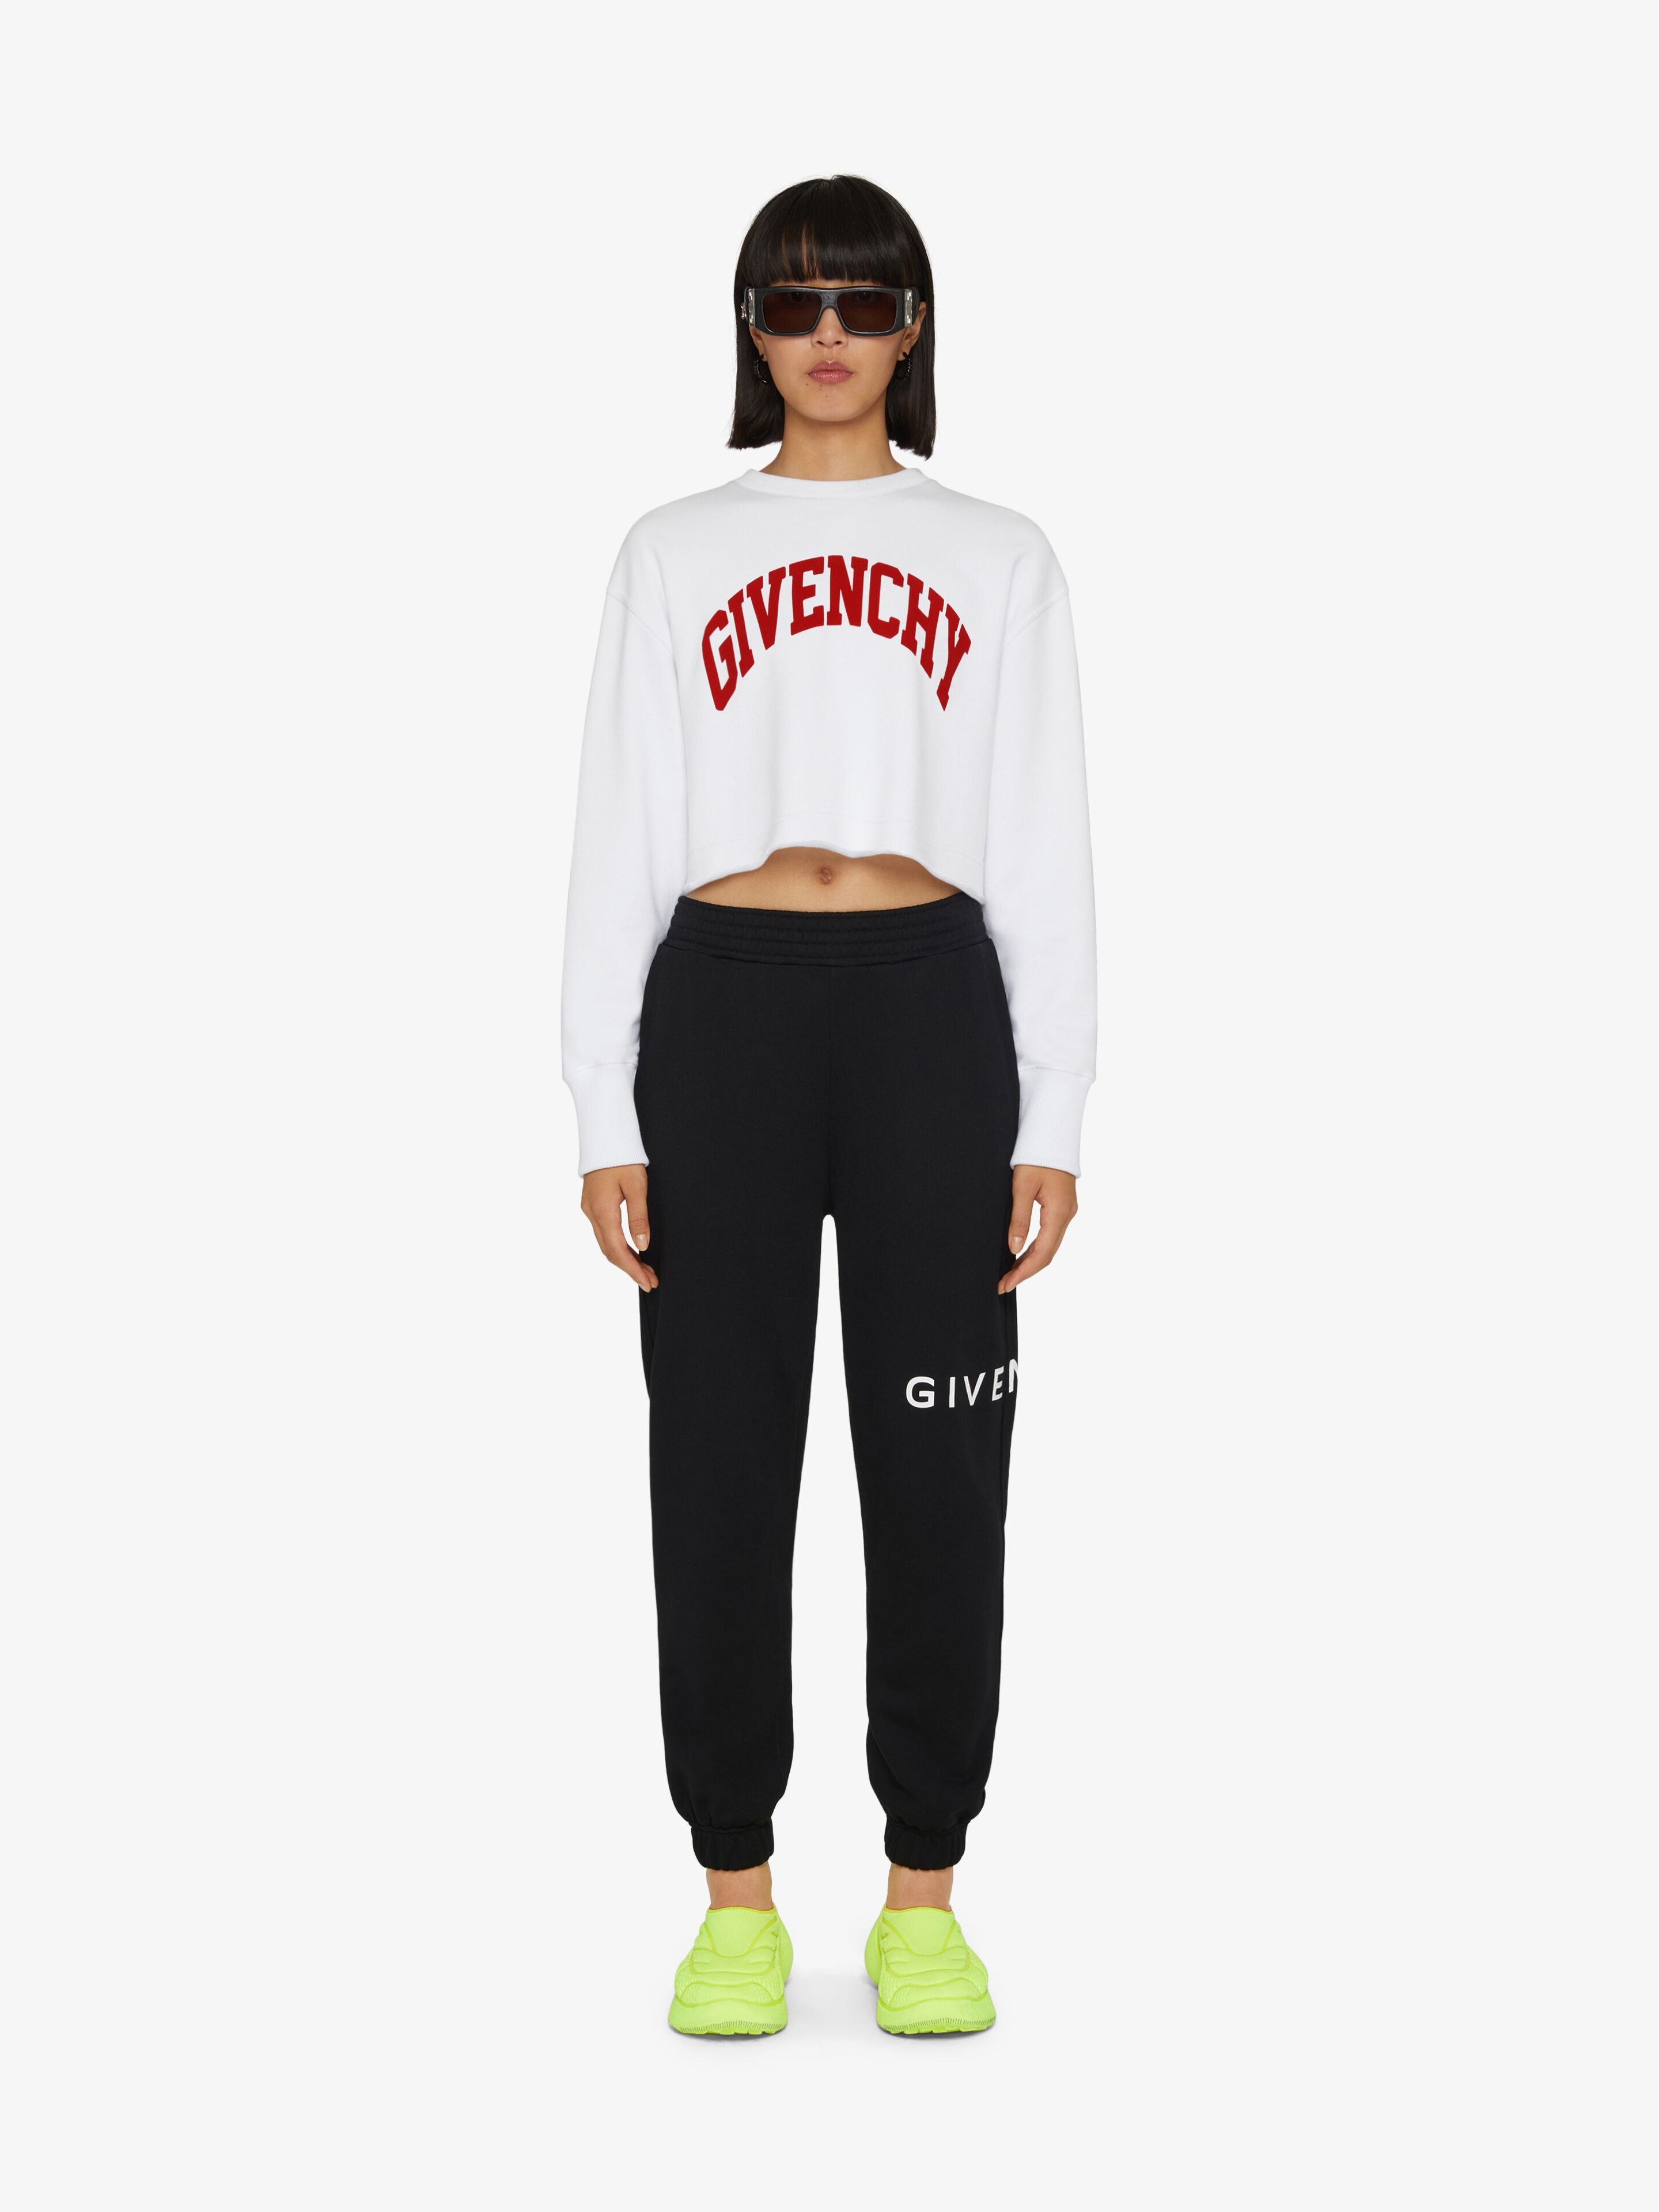 GIVENCHY ARCHETYPE SLIM FIT JOGGER PANTS IN FLEECE - 2